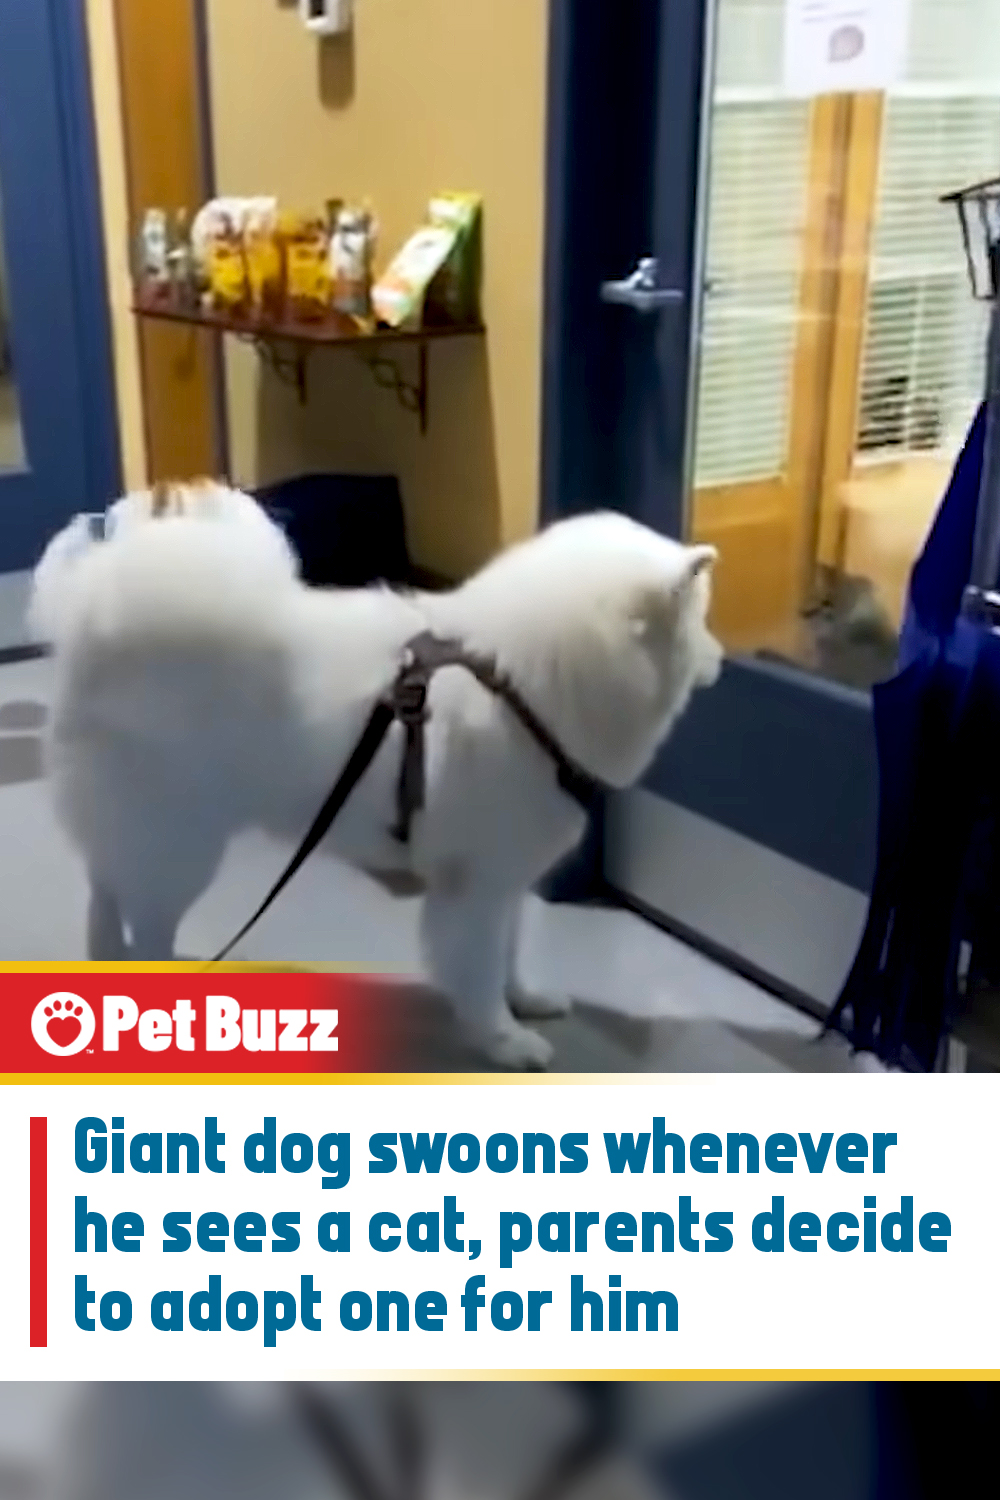 Giant dog swoons whenever he sees a cat, parents decide to adopt one for him